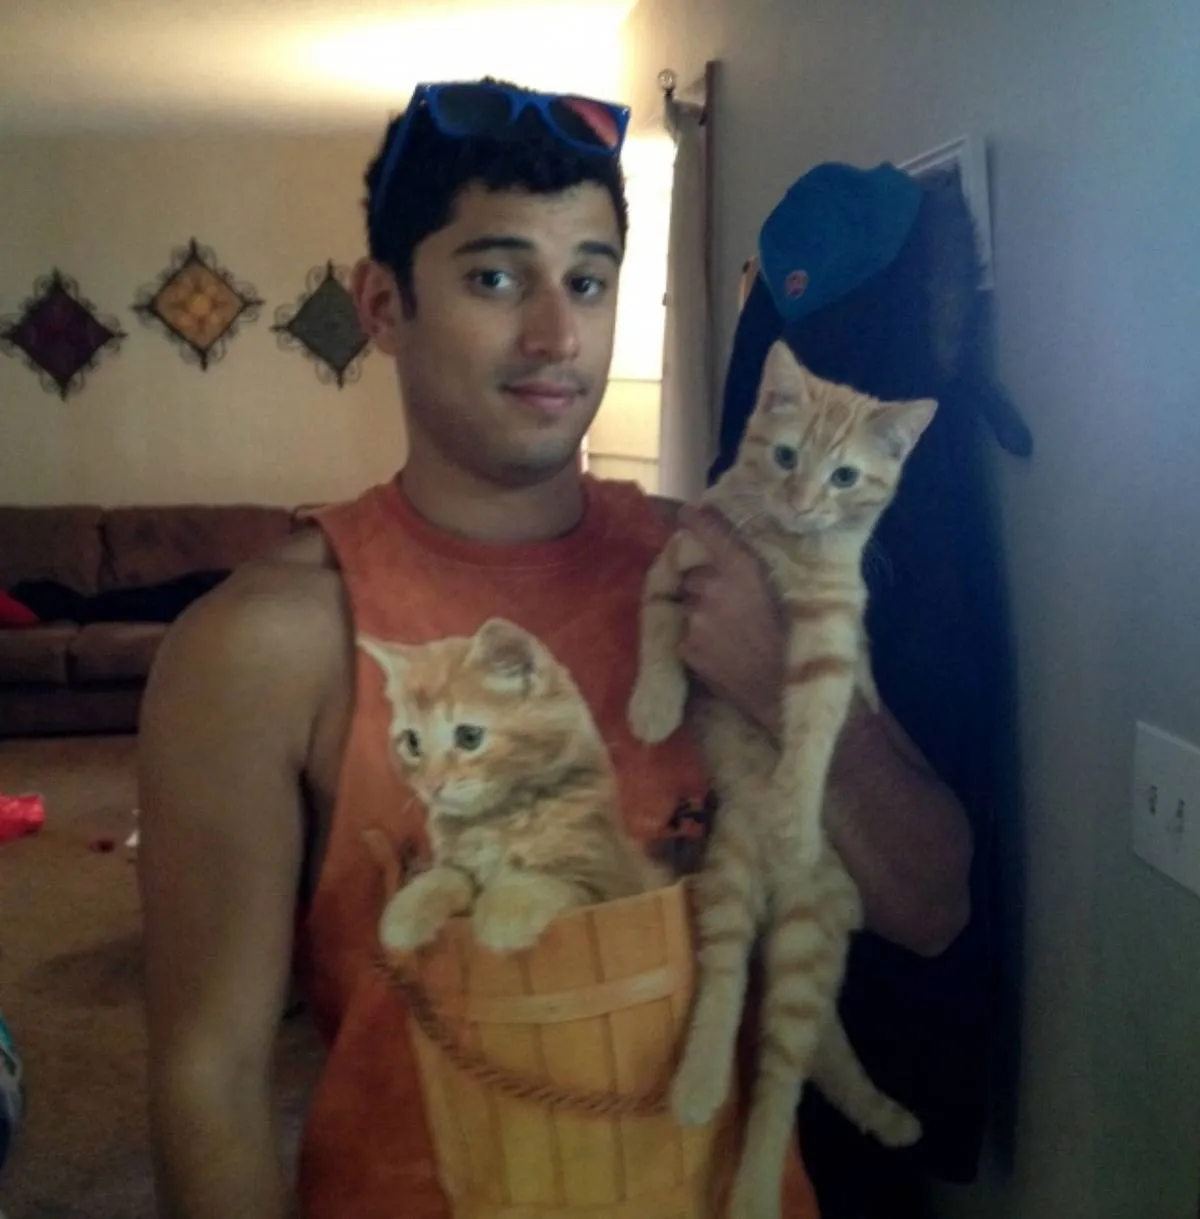 man with cat on his shirt holds cat that's identical to it